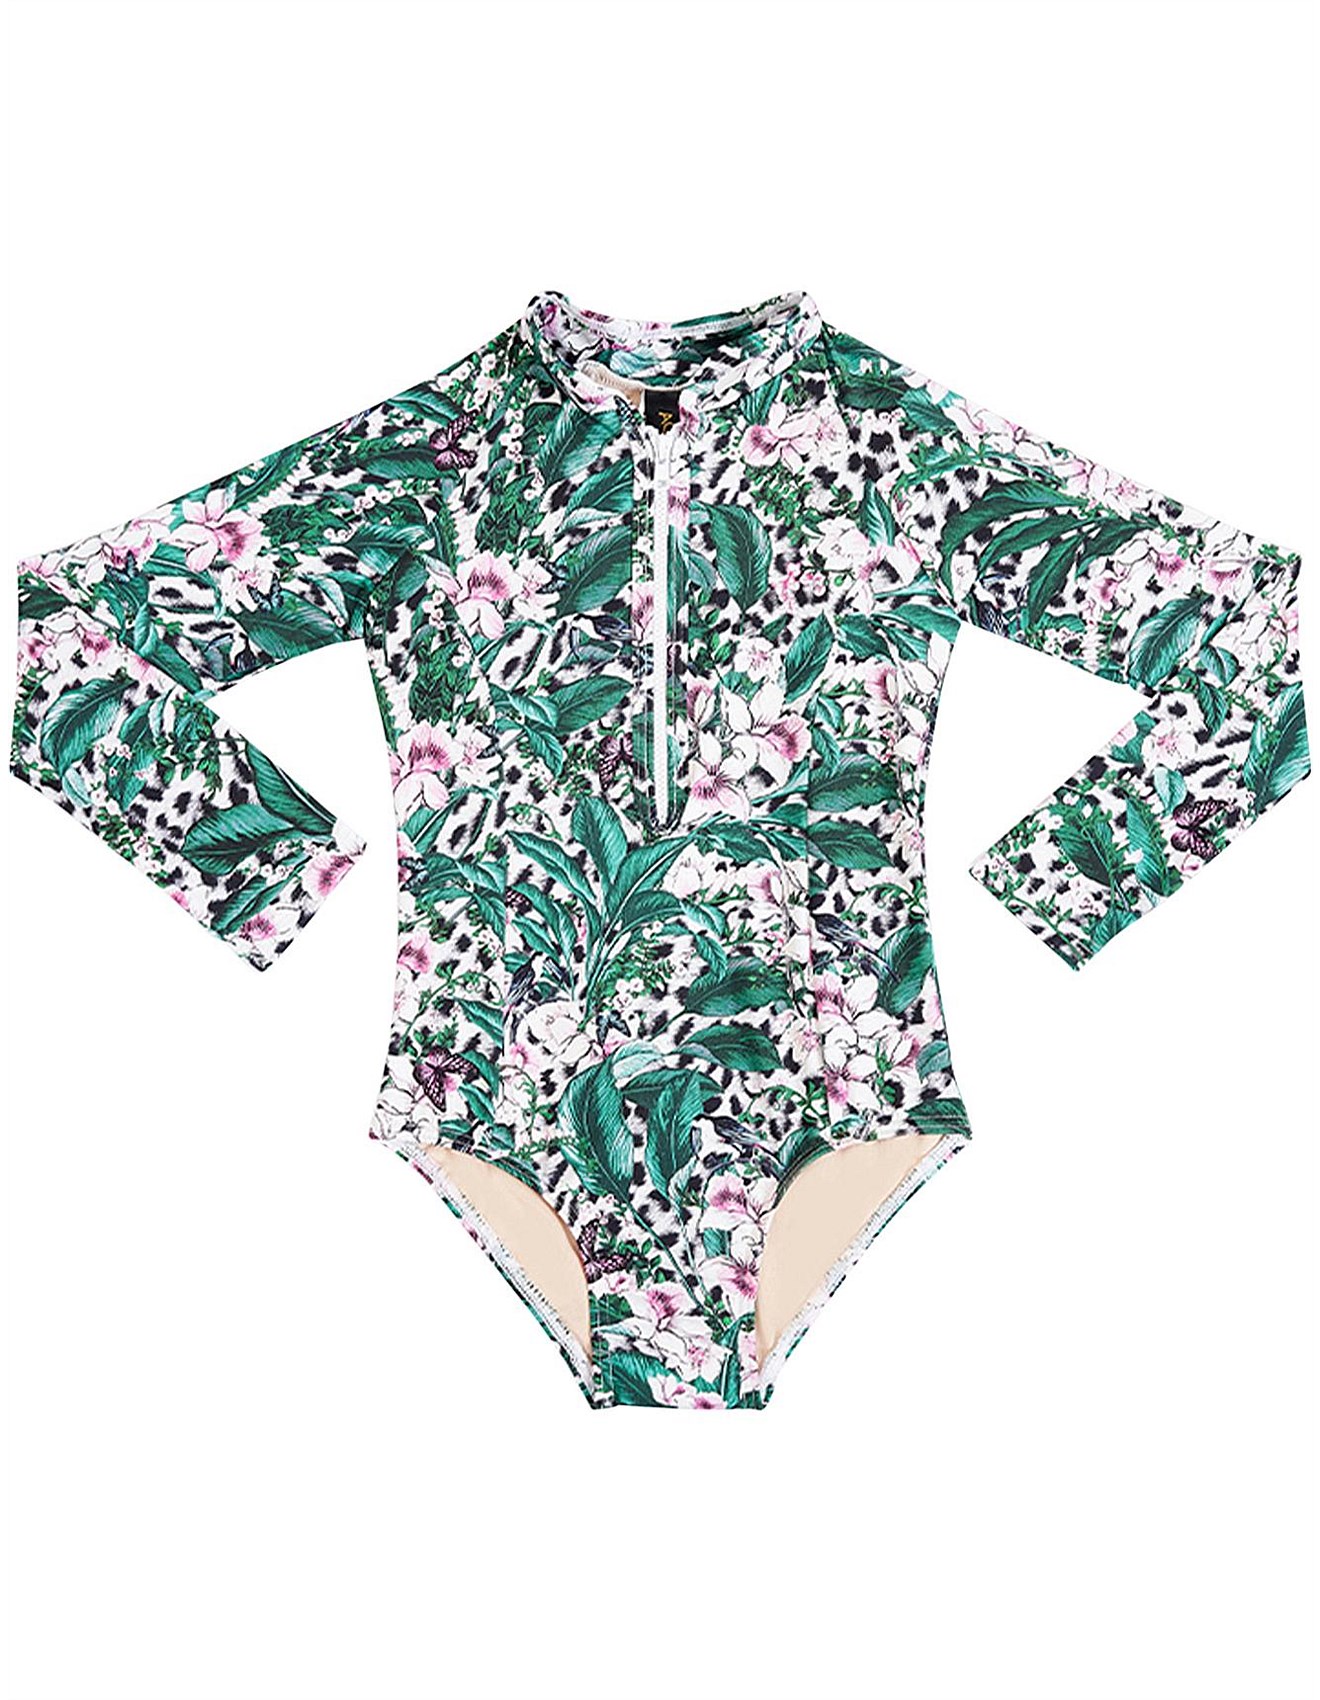 Latest information about Lily Long Sleeve One Piece (Girls 3-7) Aqua ...